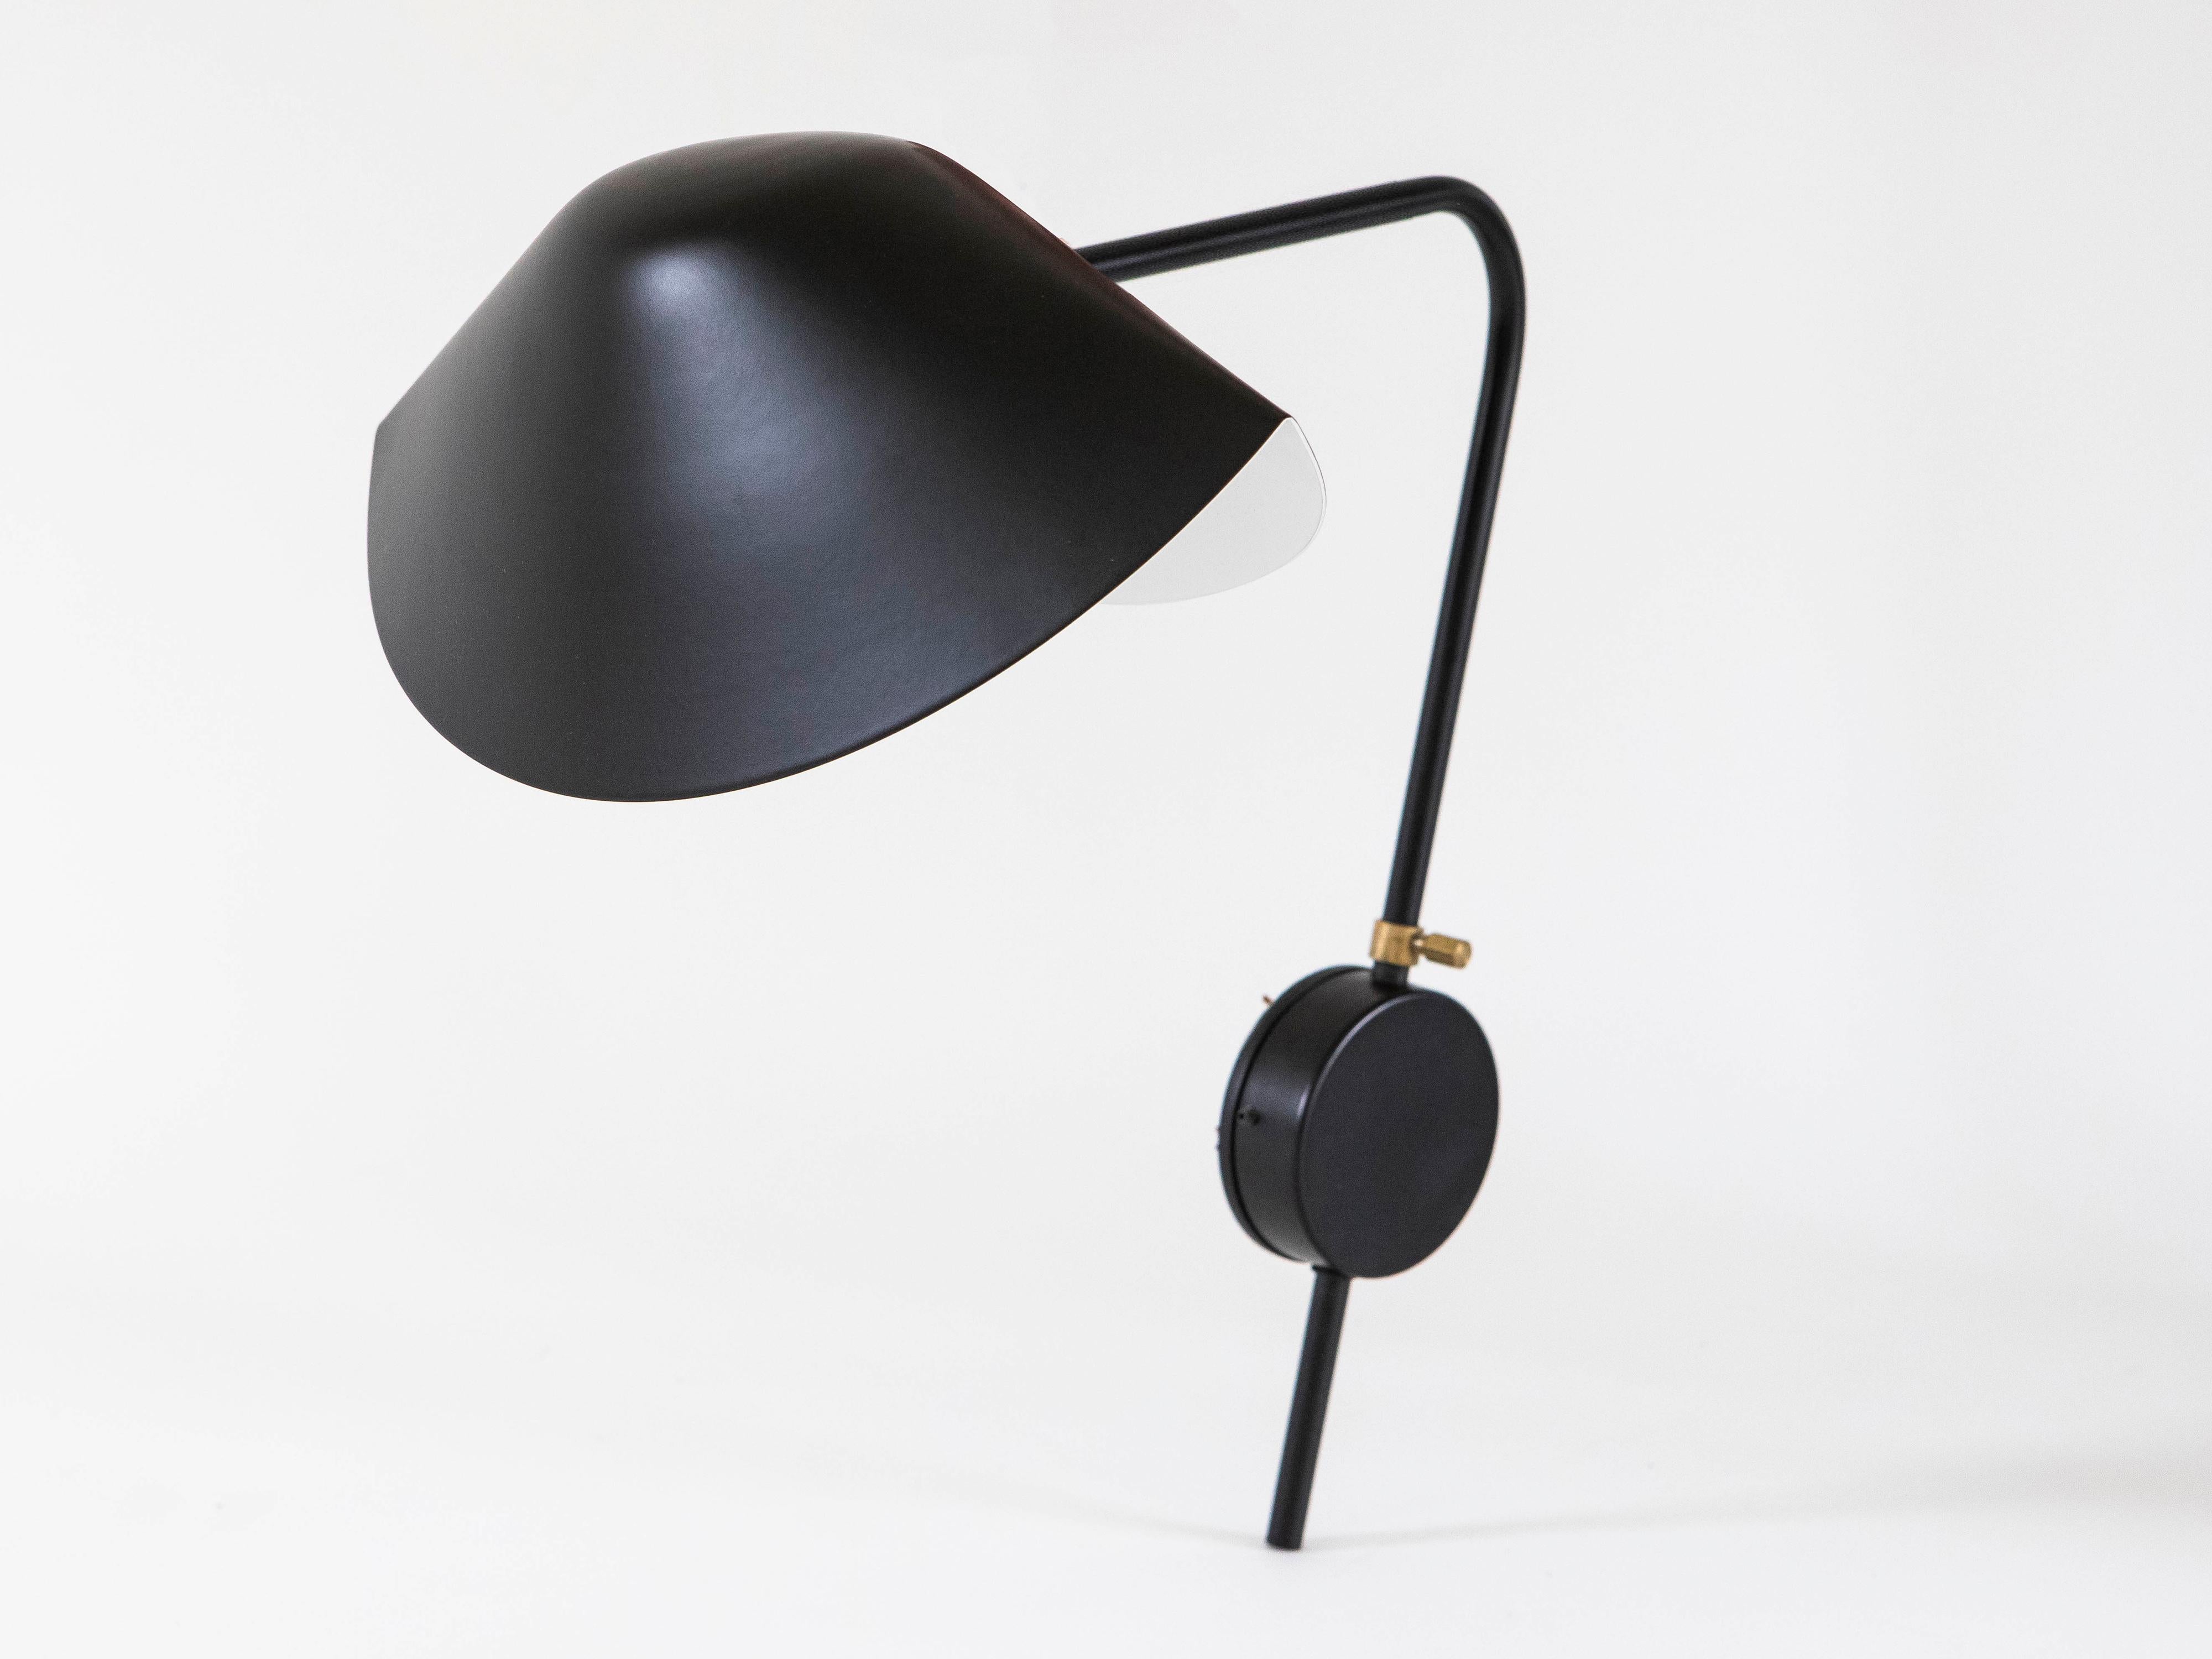 Serge Mouille single arm black Antony sconce, 2013 edition by Gueridon. The mussel-shaped shade is connected by a brass swivel and supported on a bent, rotating arm attached to the wall by a round mounting bracket. 1 socket, 60 W max.